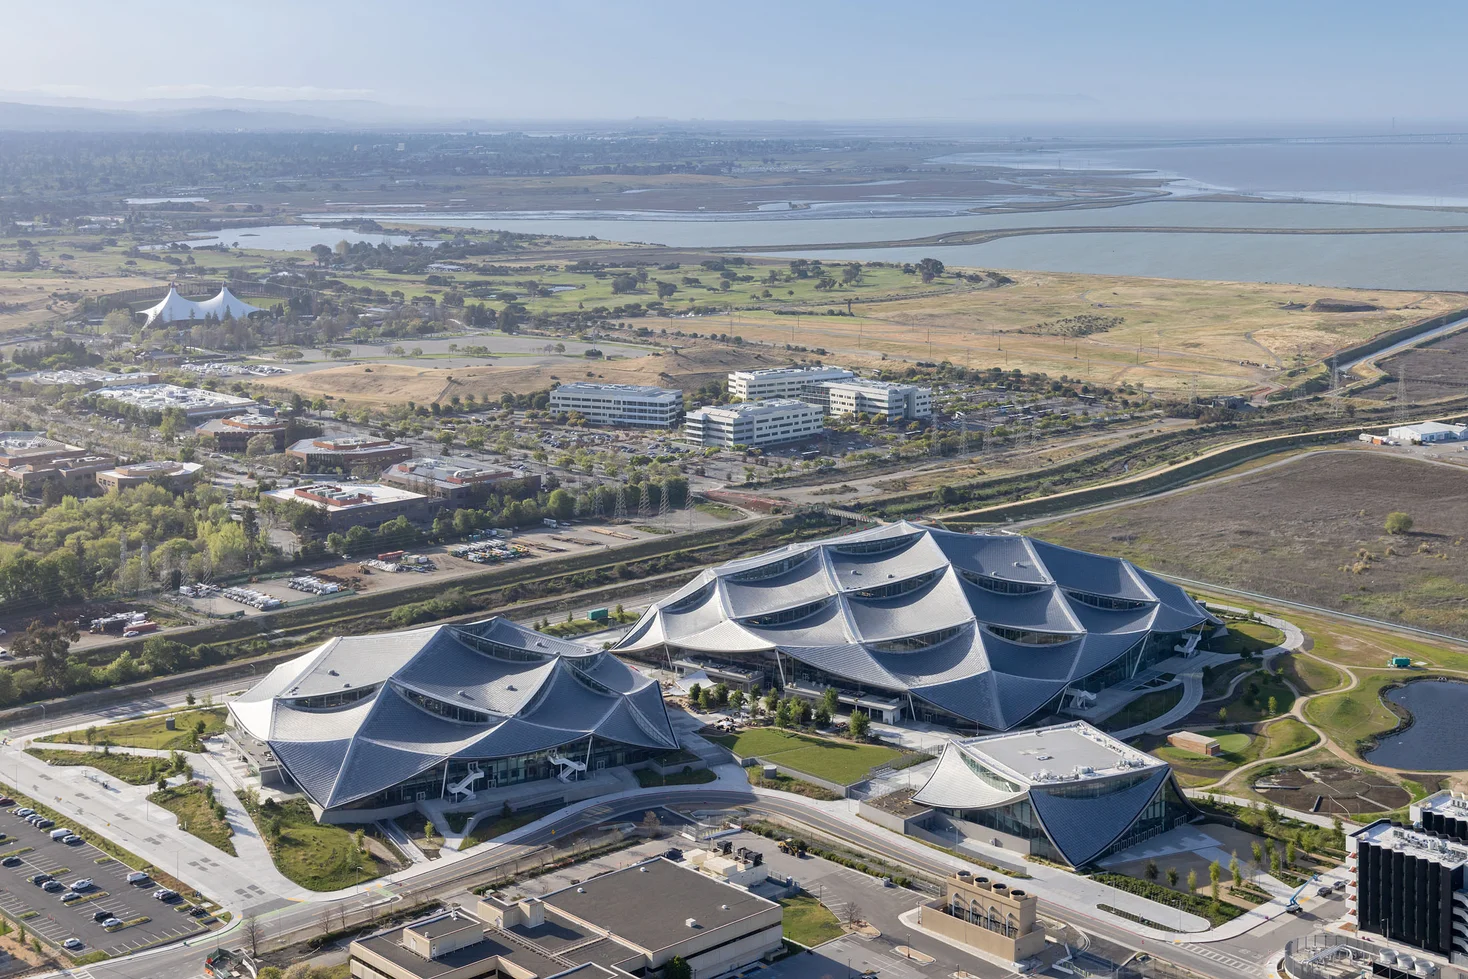 A helicopter aerial image shows the Bay View development and baylands.